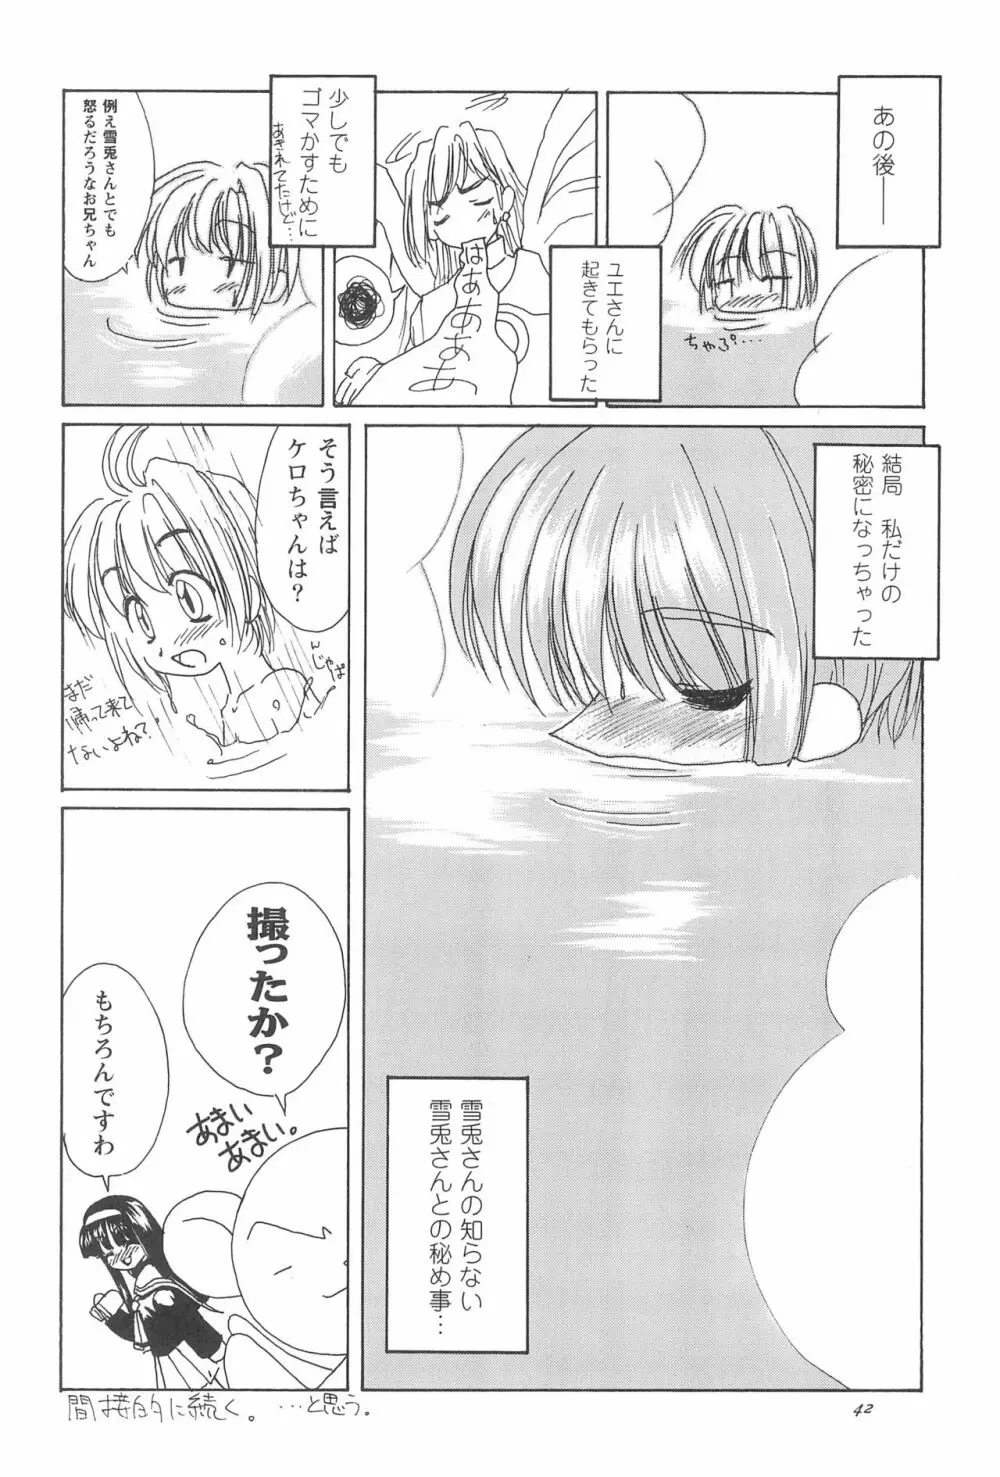 8th of ace Page.46